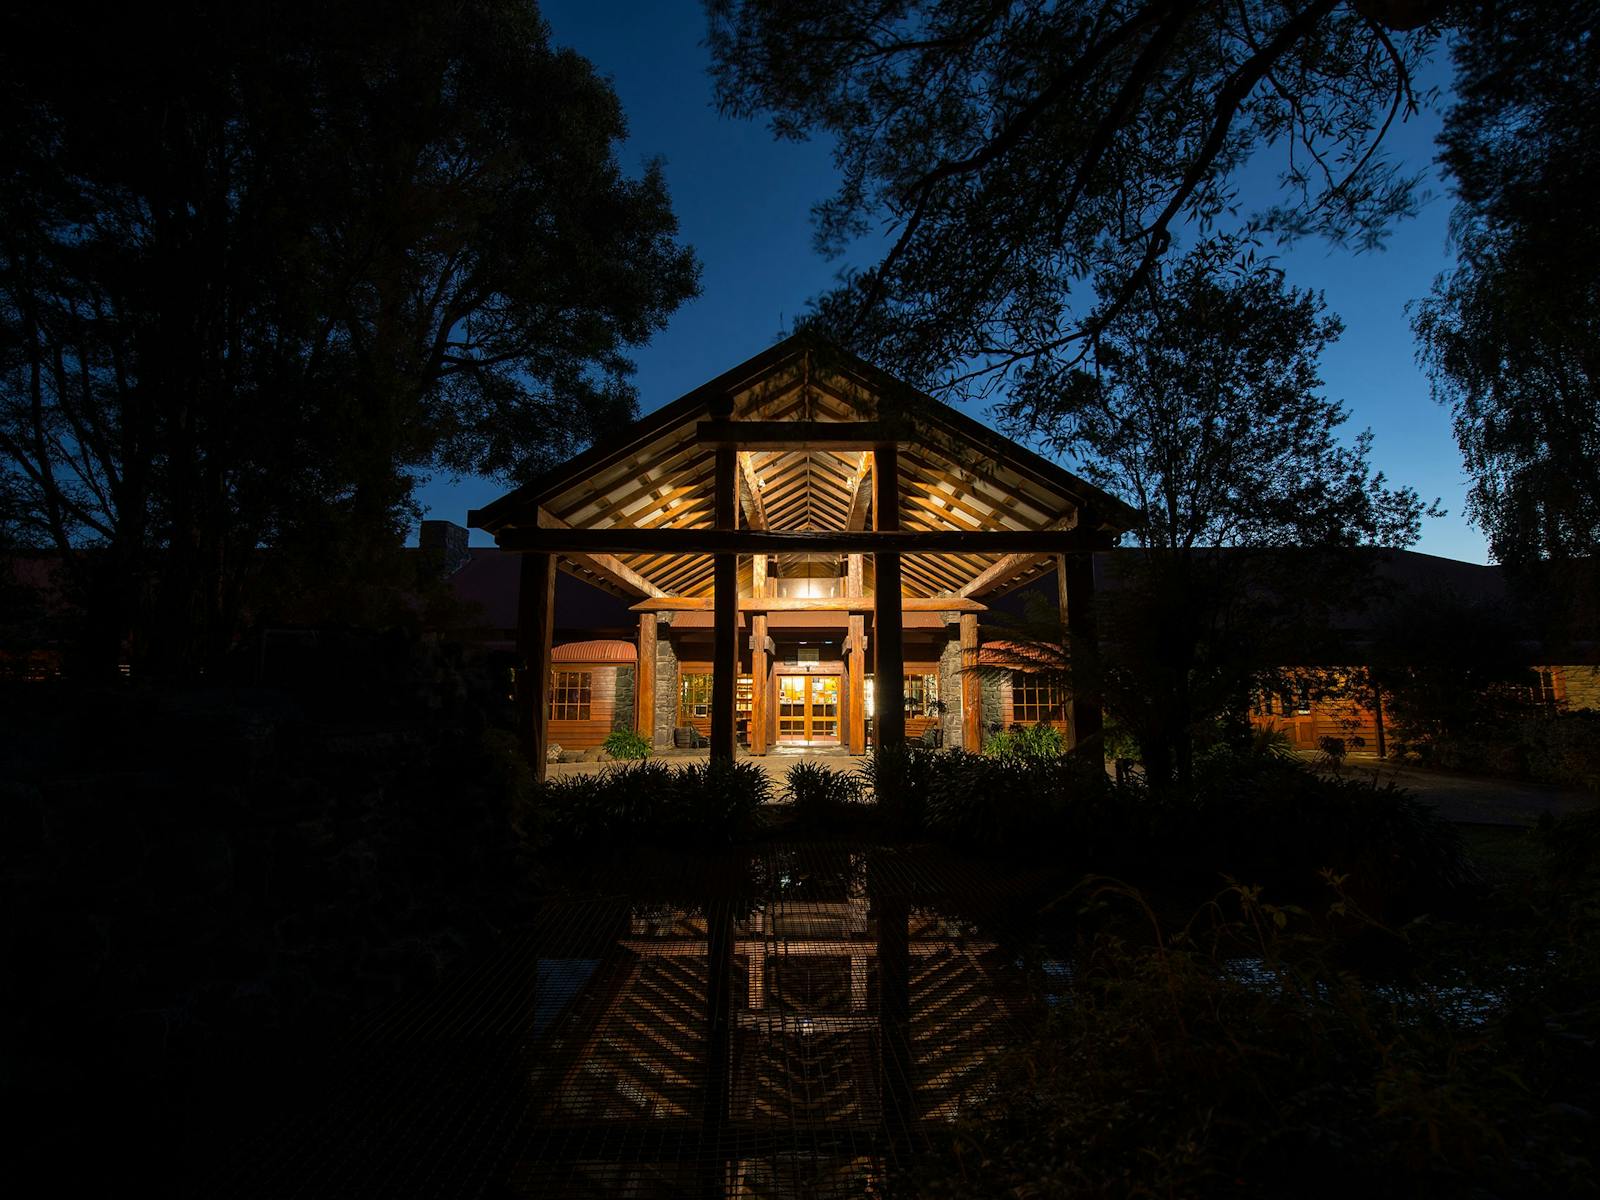 The main entry to Tall Timbers glows with the surrounding trees silhouetted in the eveningsky